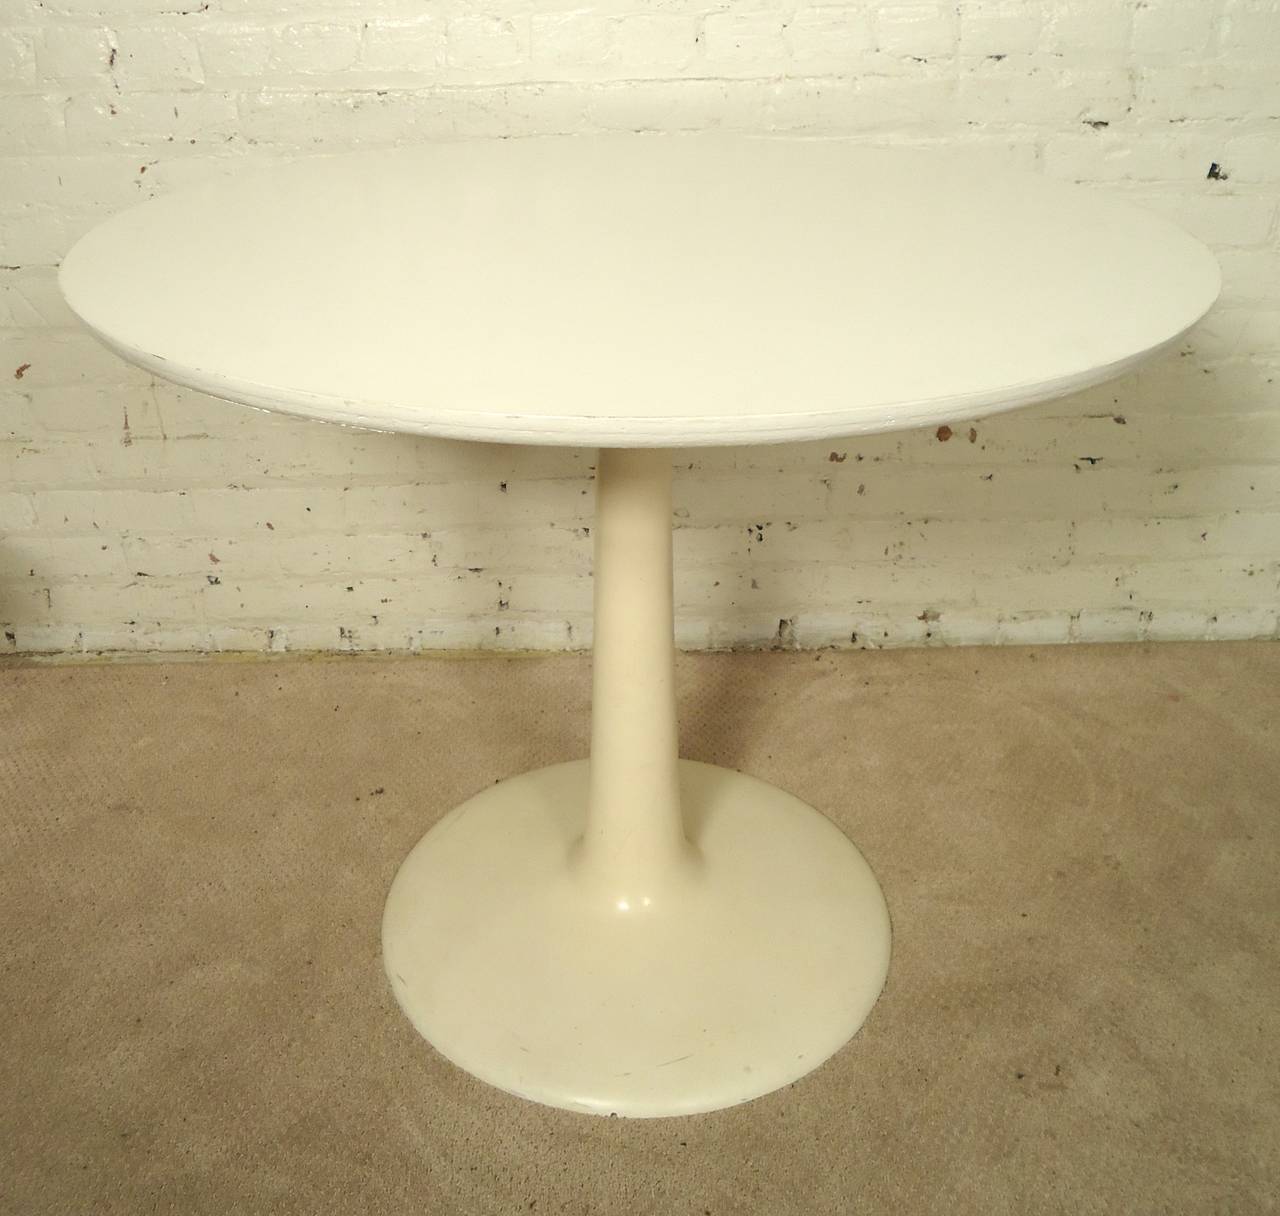 Four lucite back swivel dining chairs and round white table, all with matching tulip bases. Vinyl seats, elegant "wing" backs, graceful tulip bases. 
Table: 36"dia 29"h

(Please confirm item location - NY or NJ - with dealer)